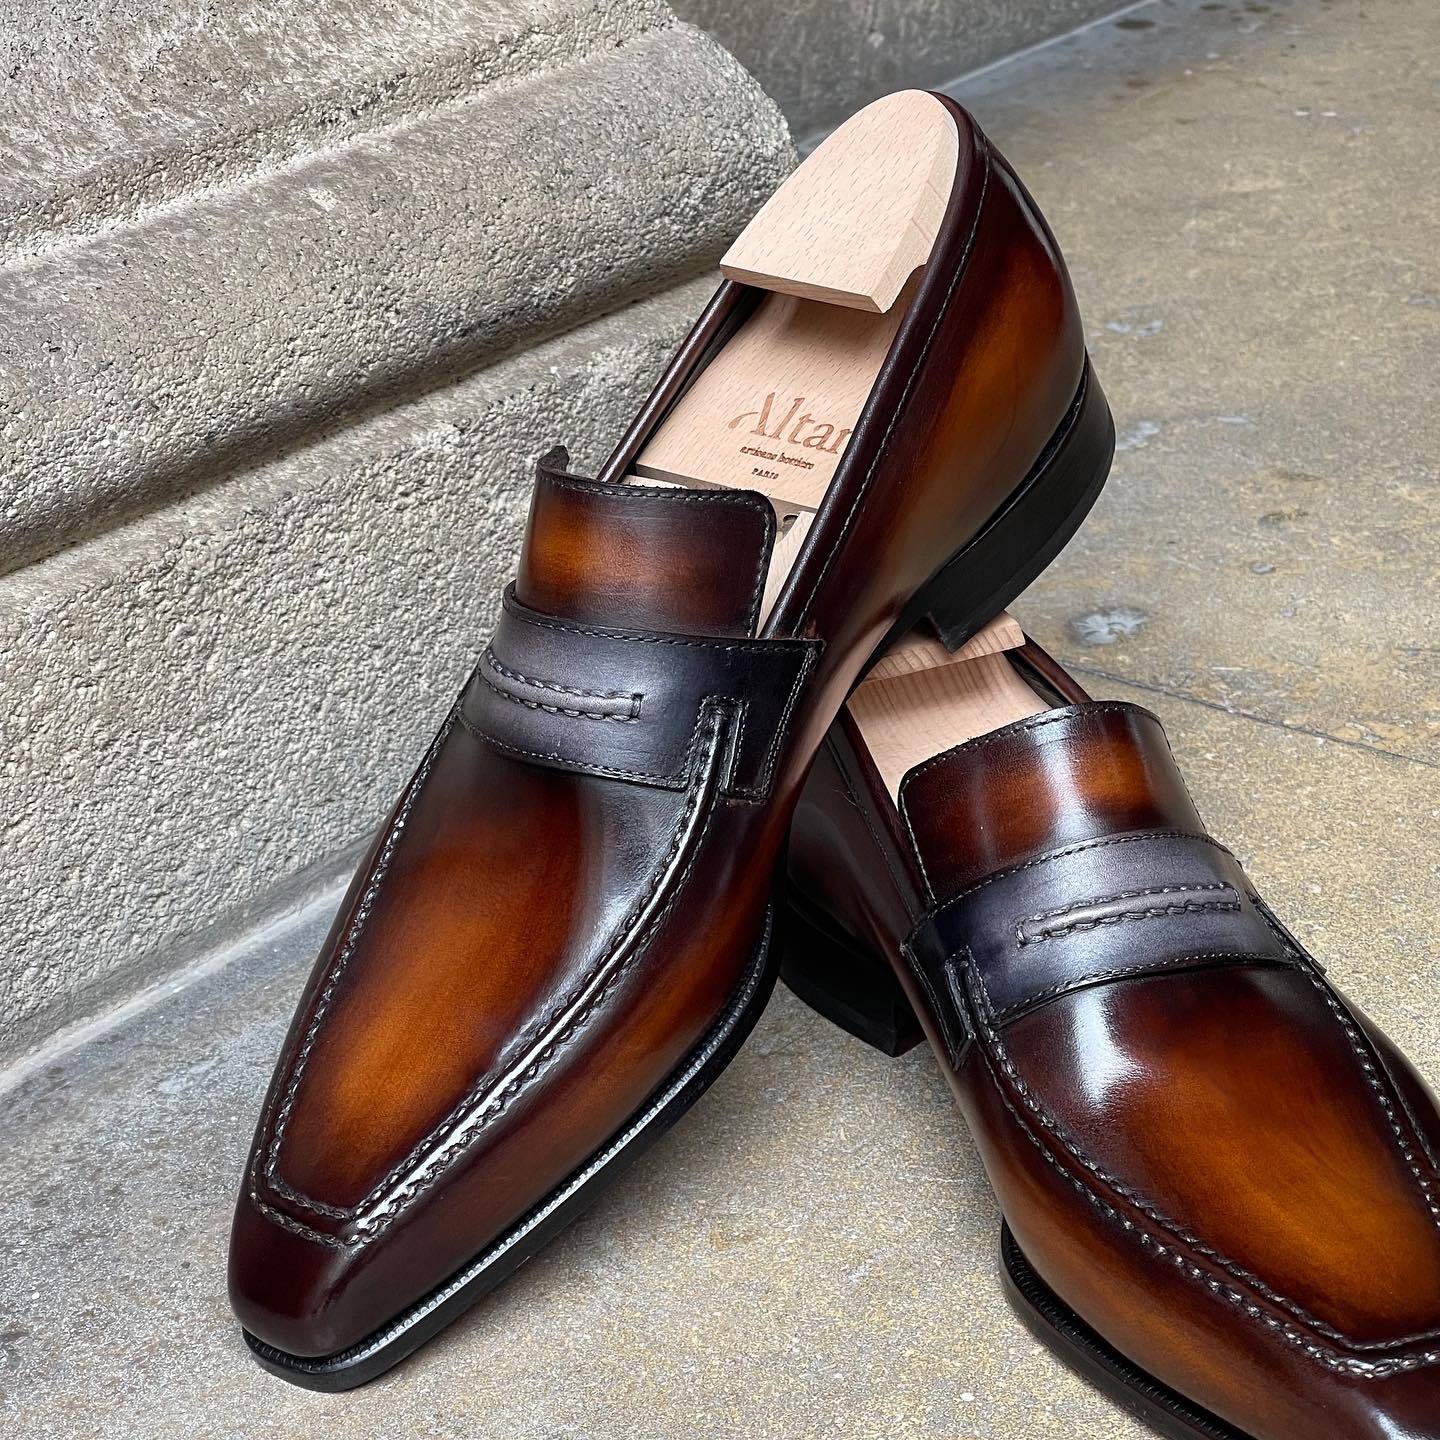 Lincoln Loafer - Caramel and Grey strap